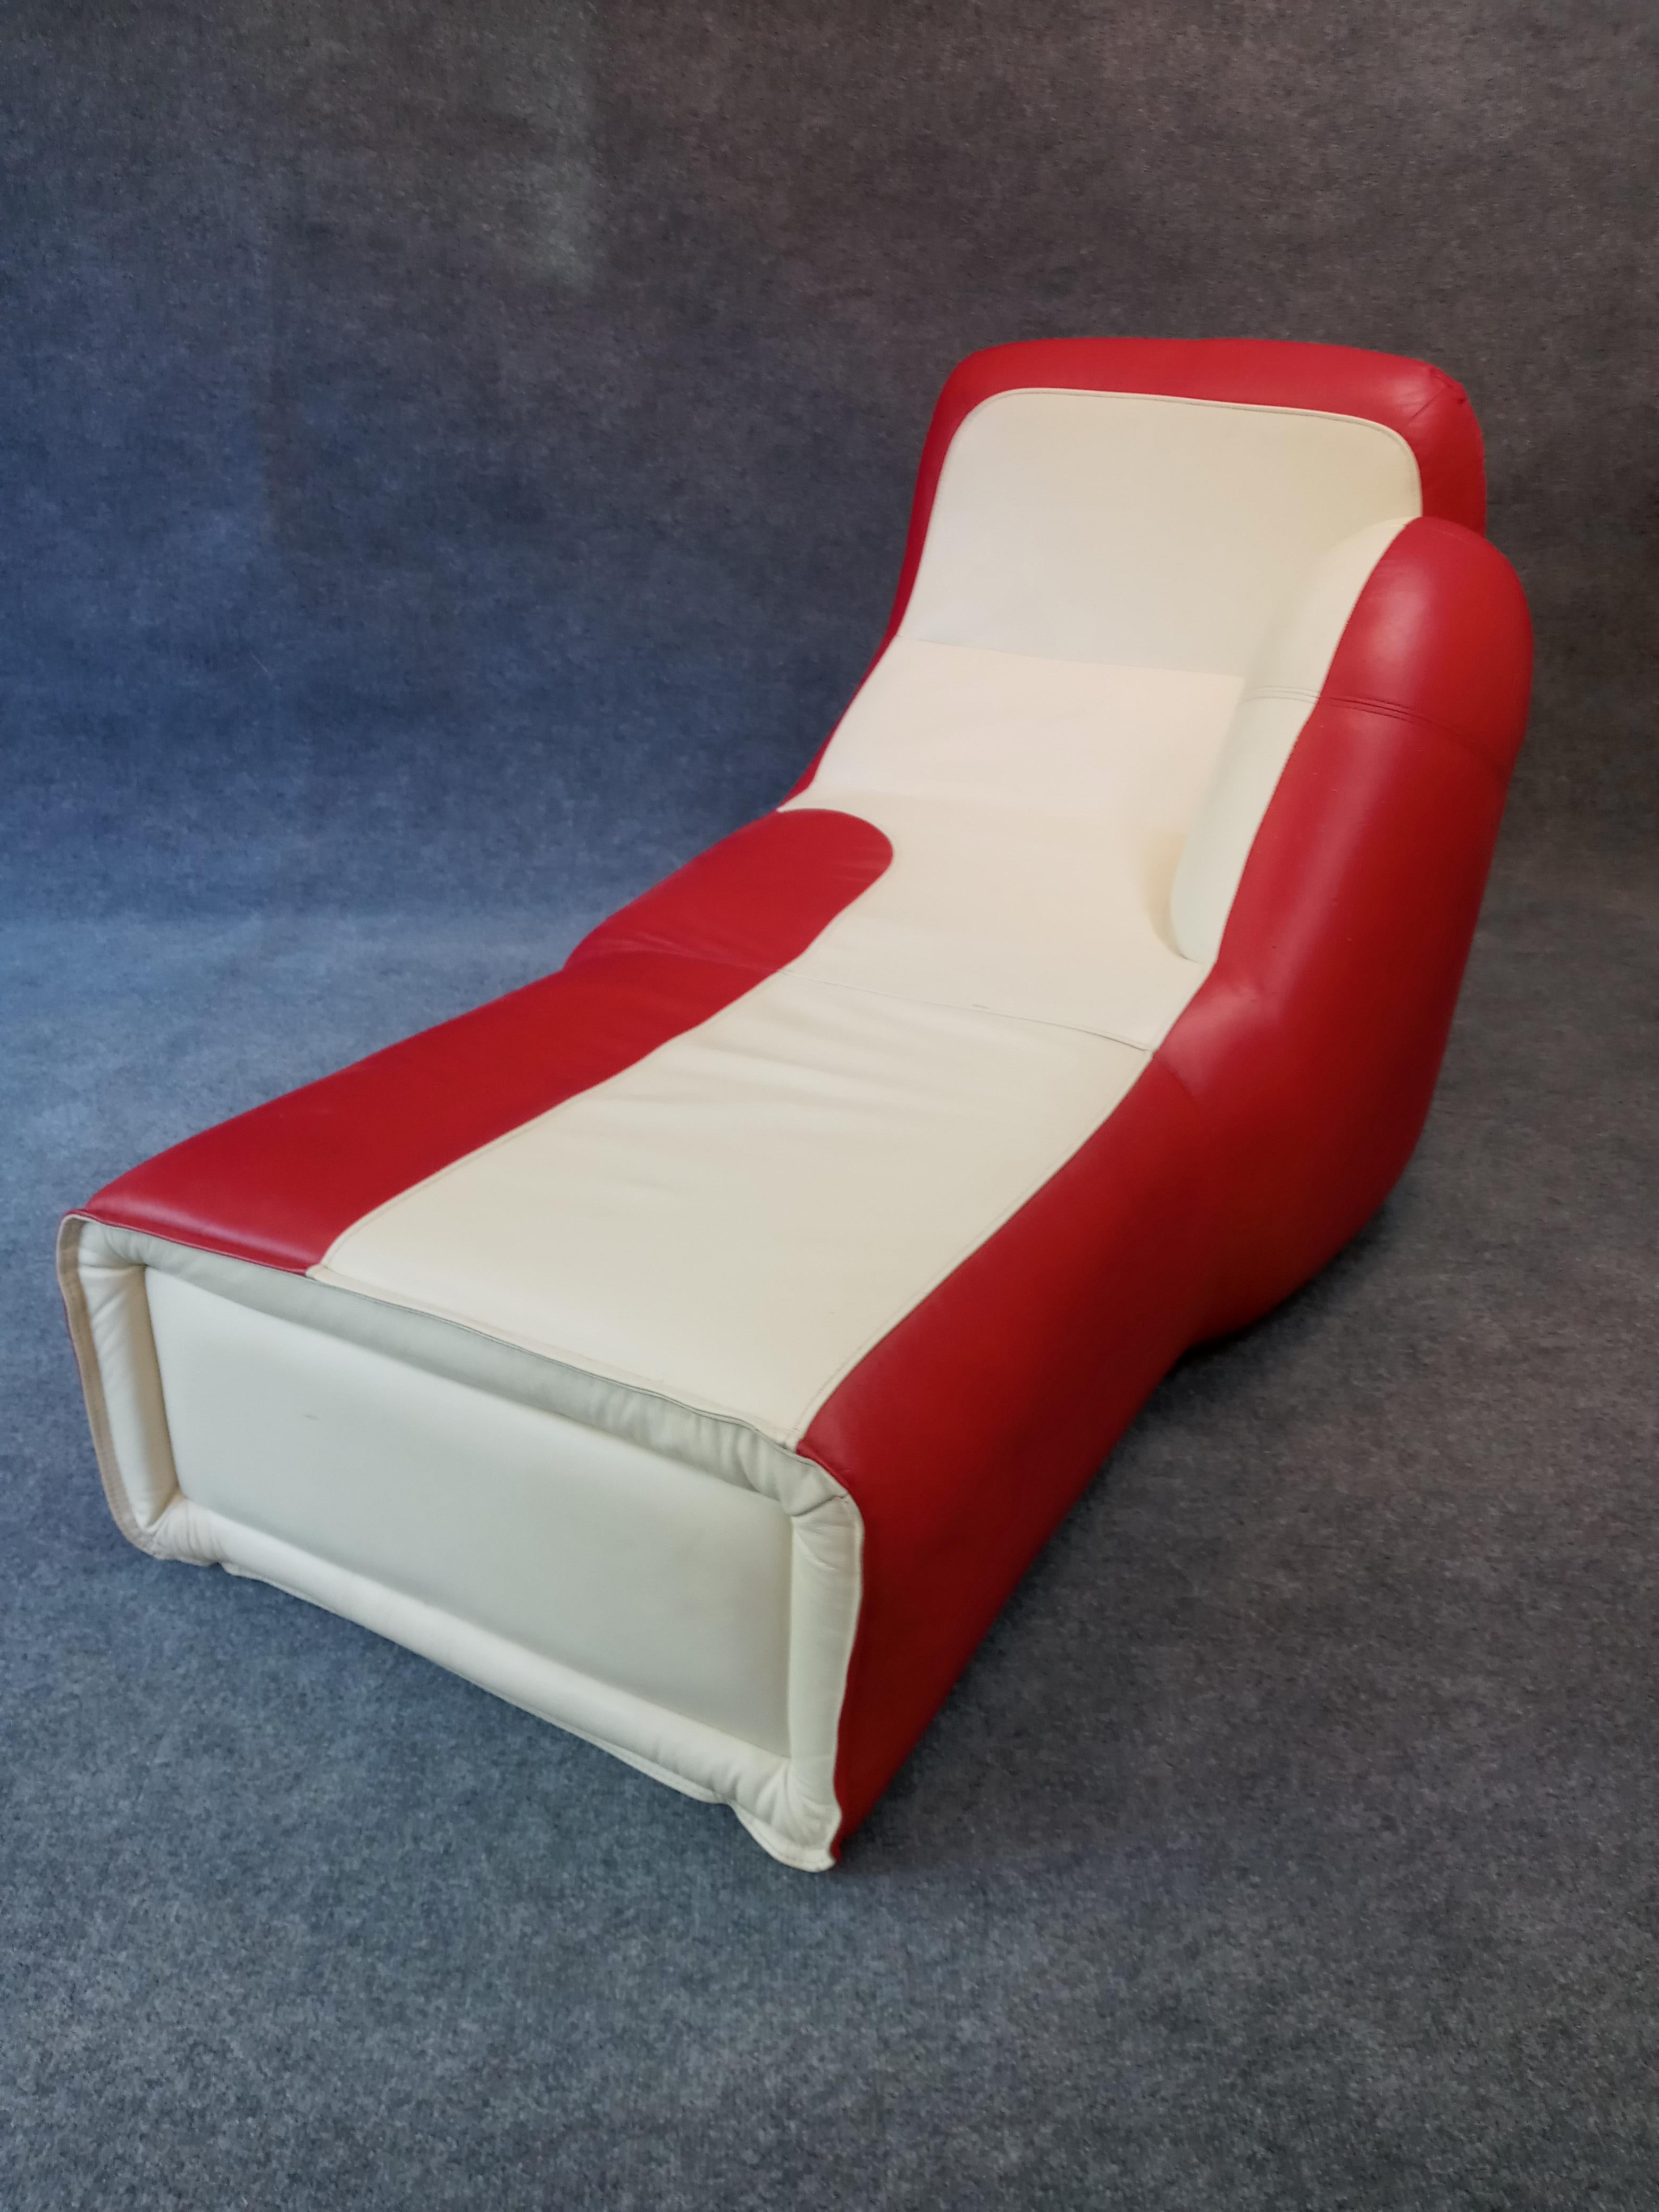 Late 20th Century De Sede Style Boxing Glove Chaise Lounge Chair